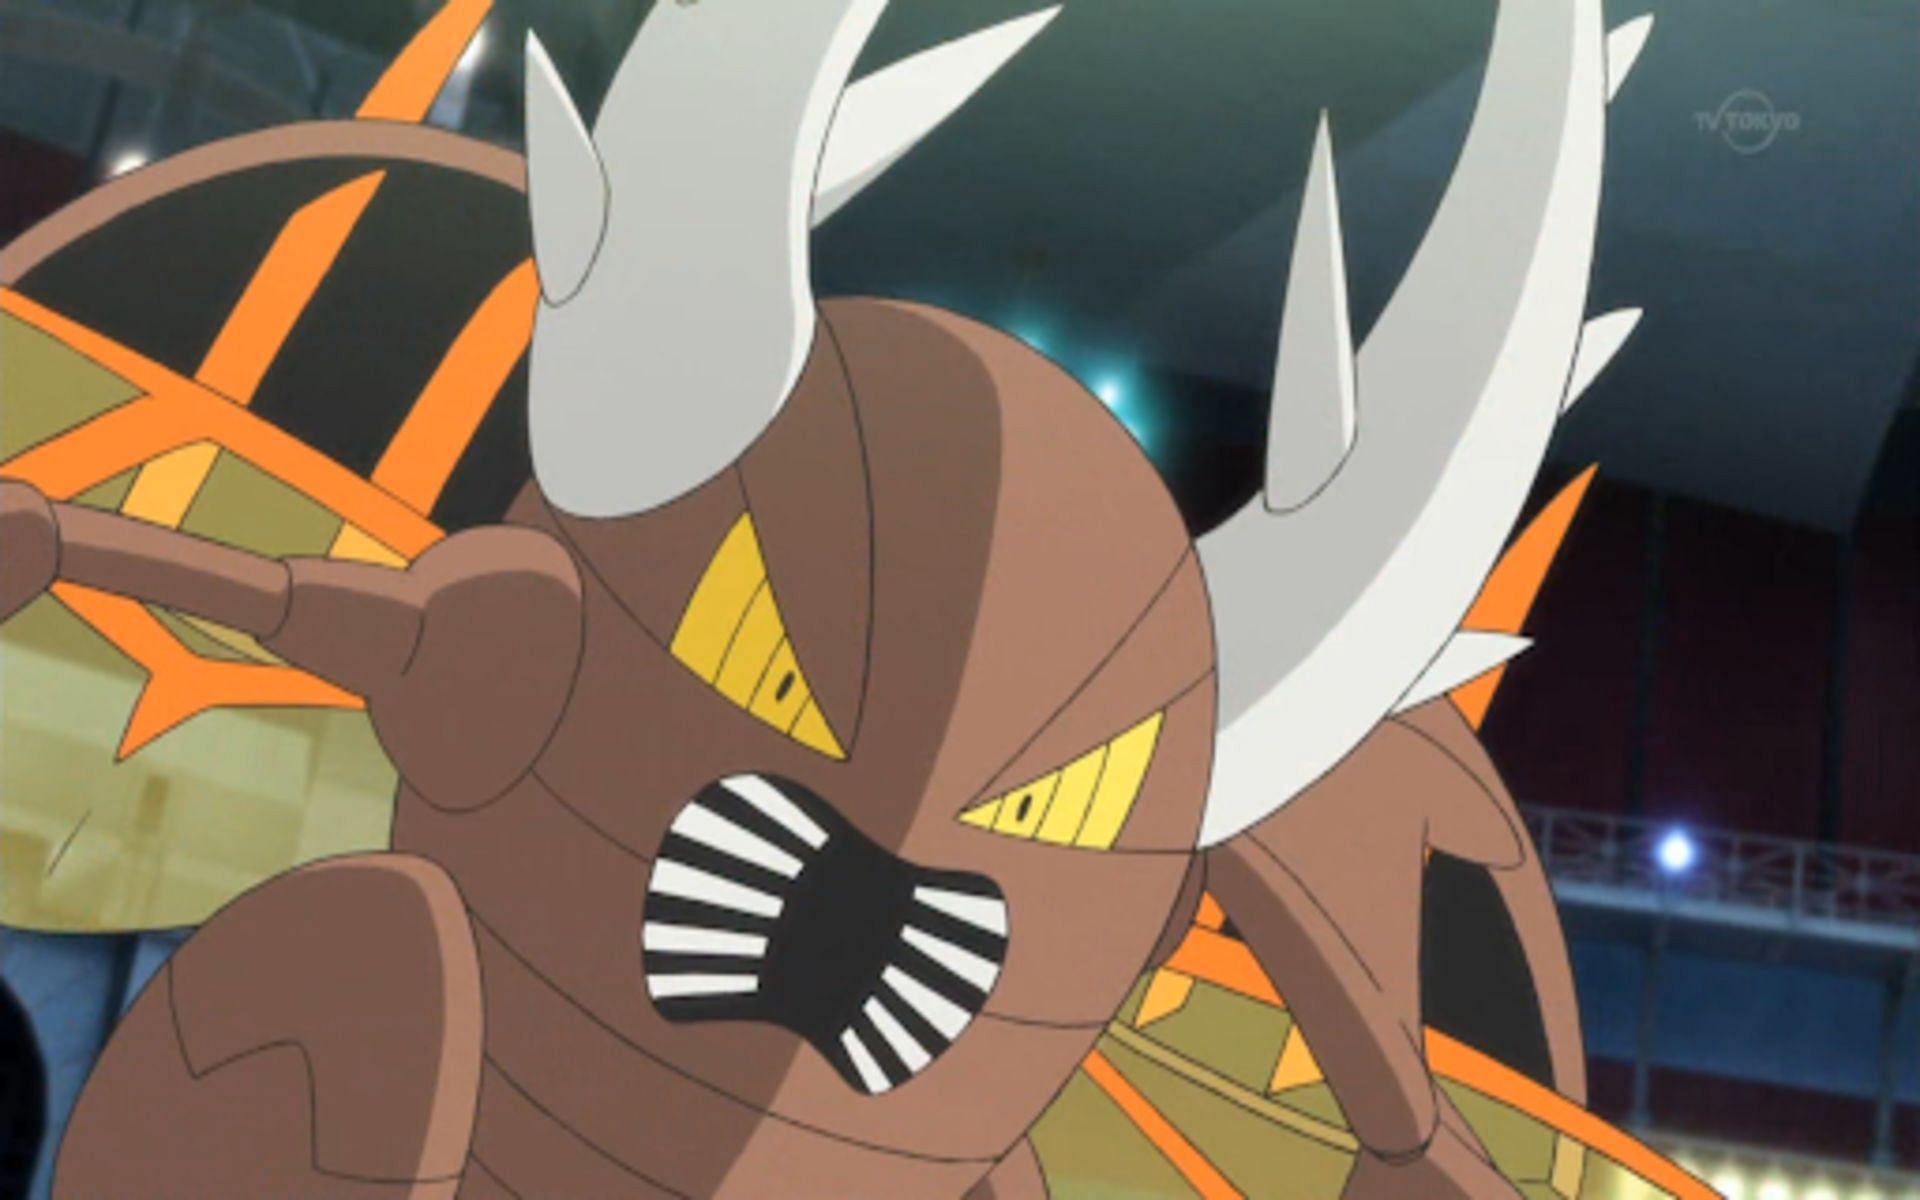 Pinsir can learn strong Fighting-type moves as well as Bug-type moves (Image via The Pokemon Company)